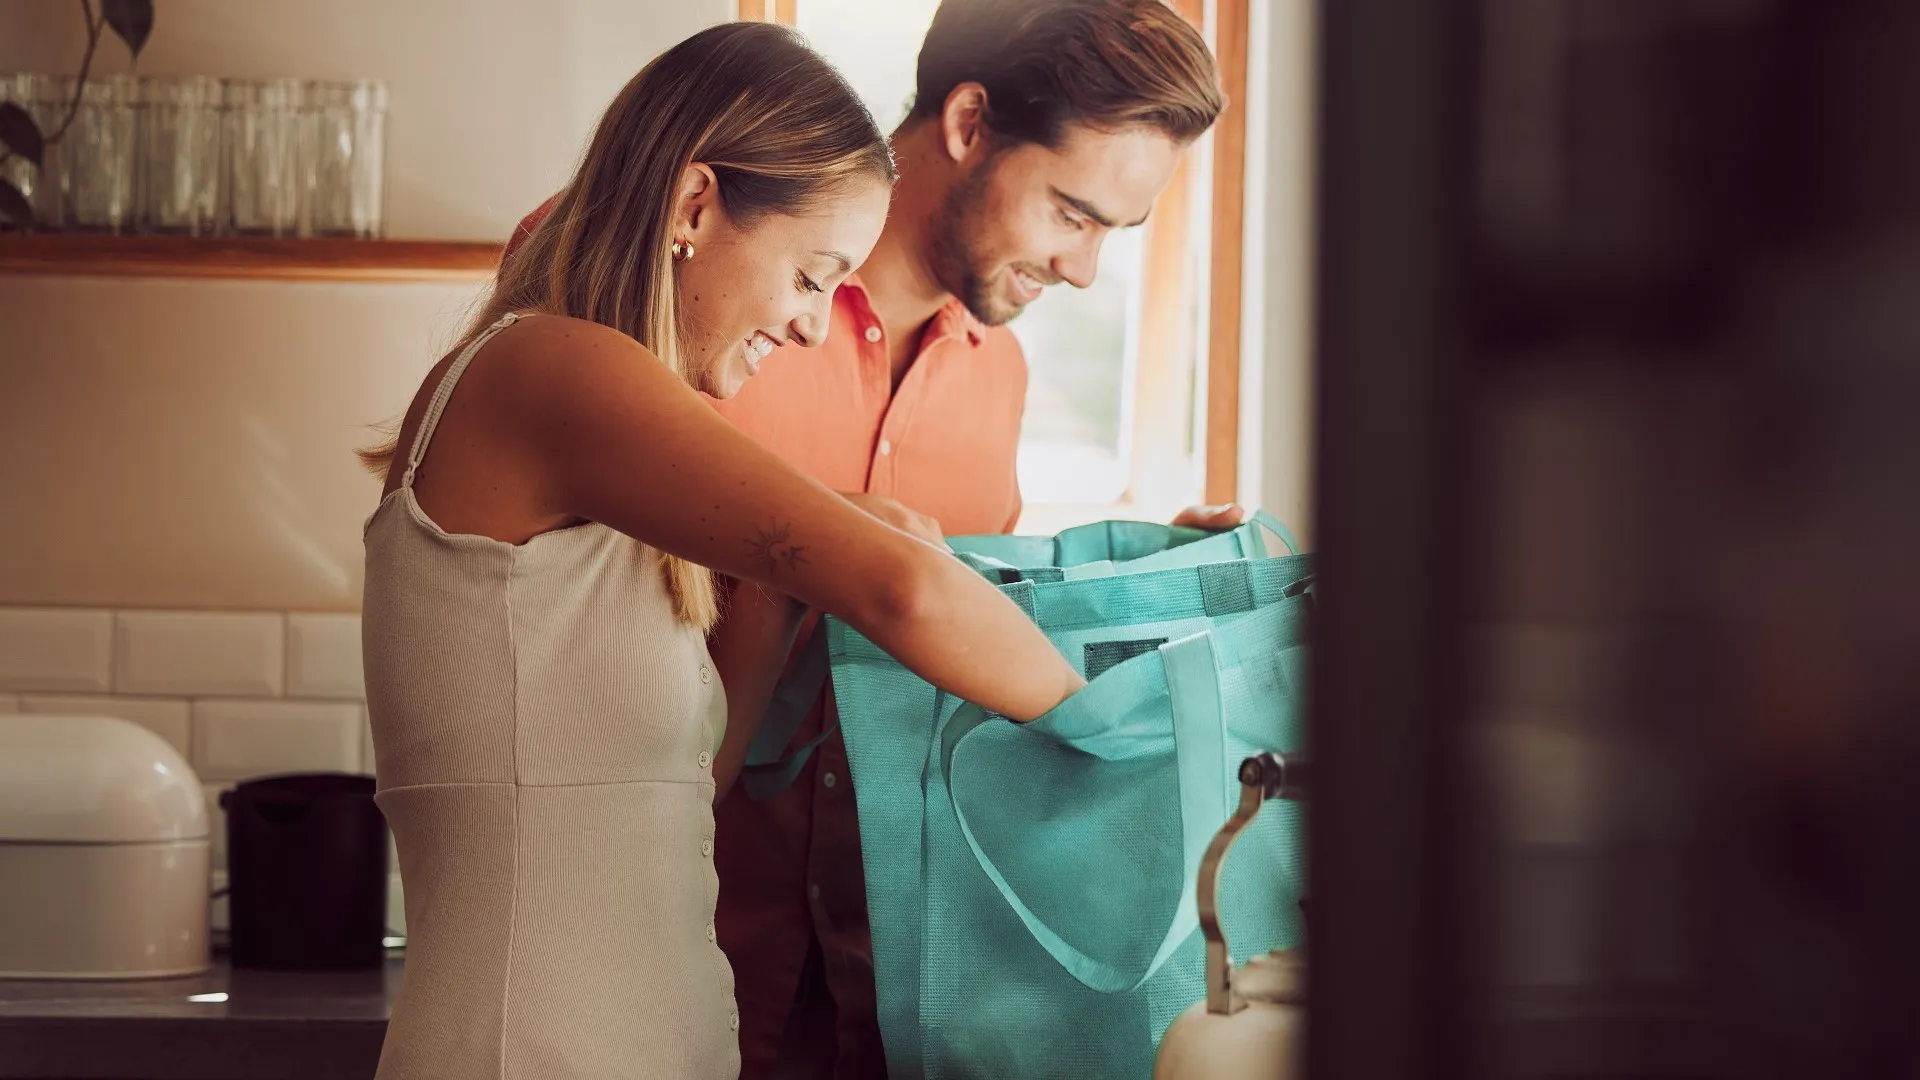 Couple home after grocery shopping at supermarket store. Retail consumer, sustainable shopper and young people unpacking and checking food products, goods and groceries from reusable bag in a kitchen stock photo